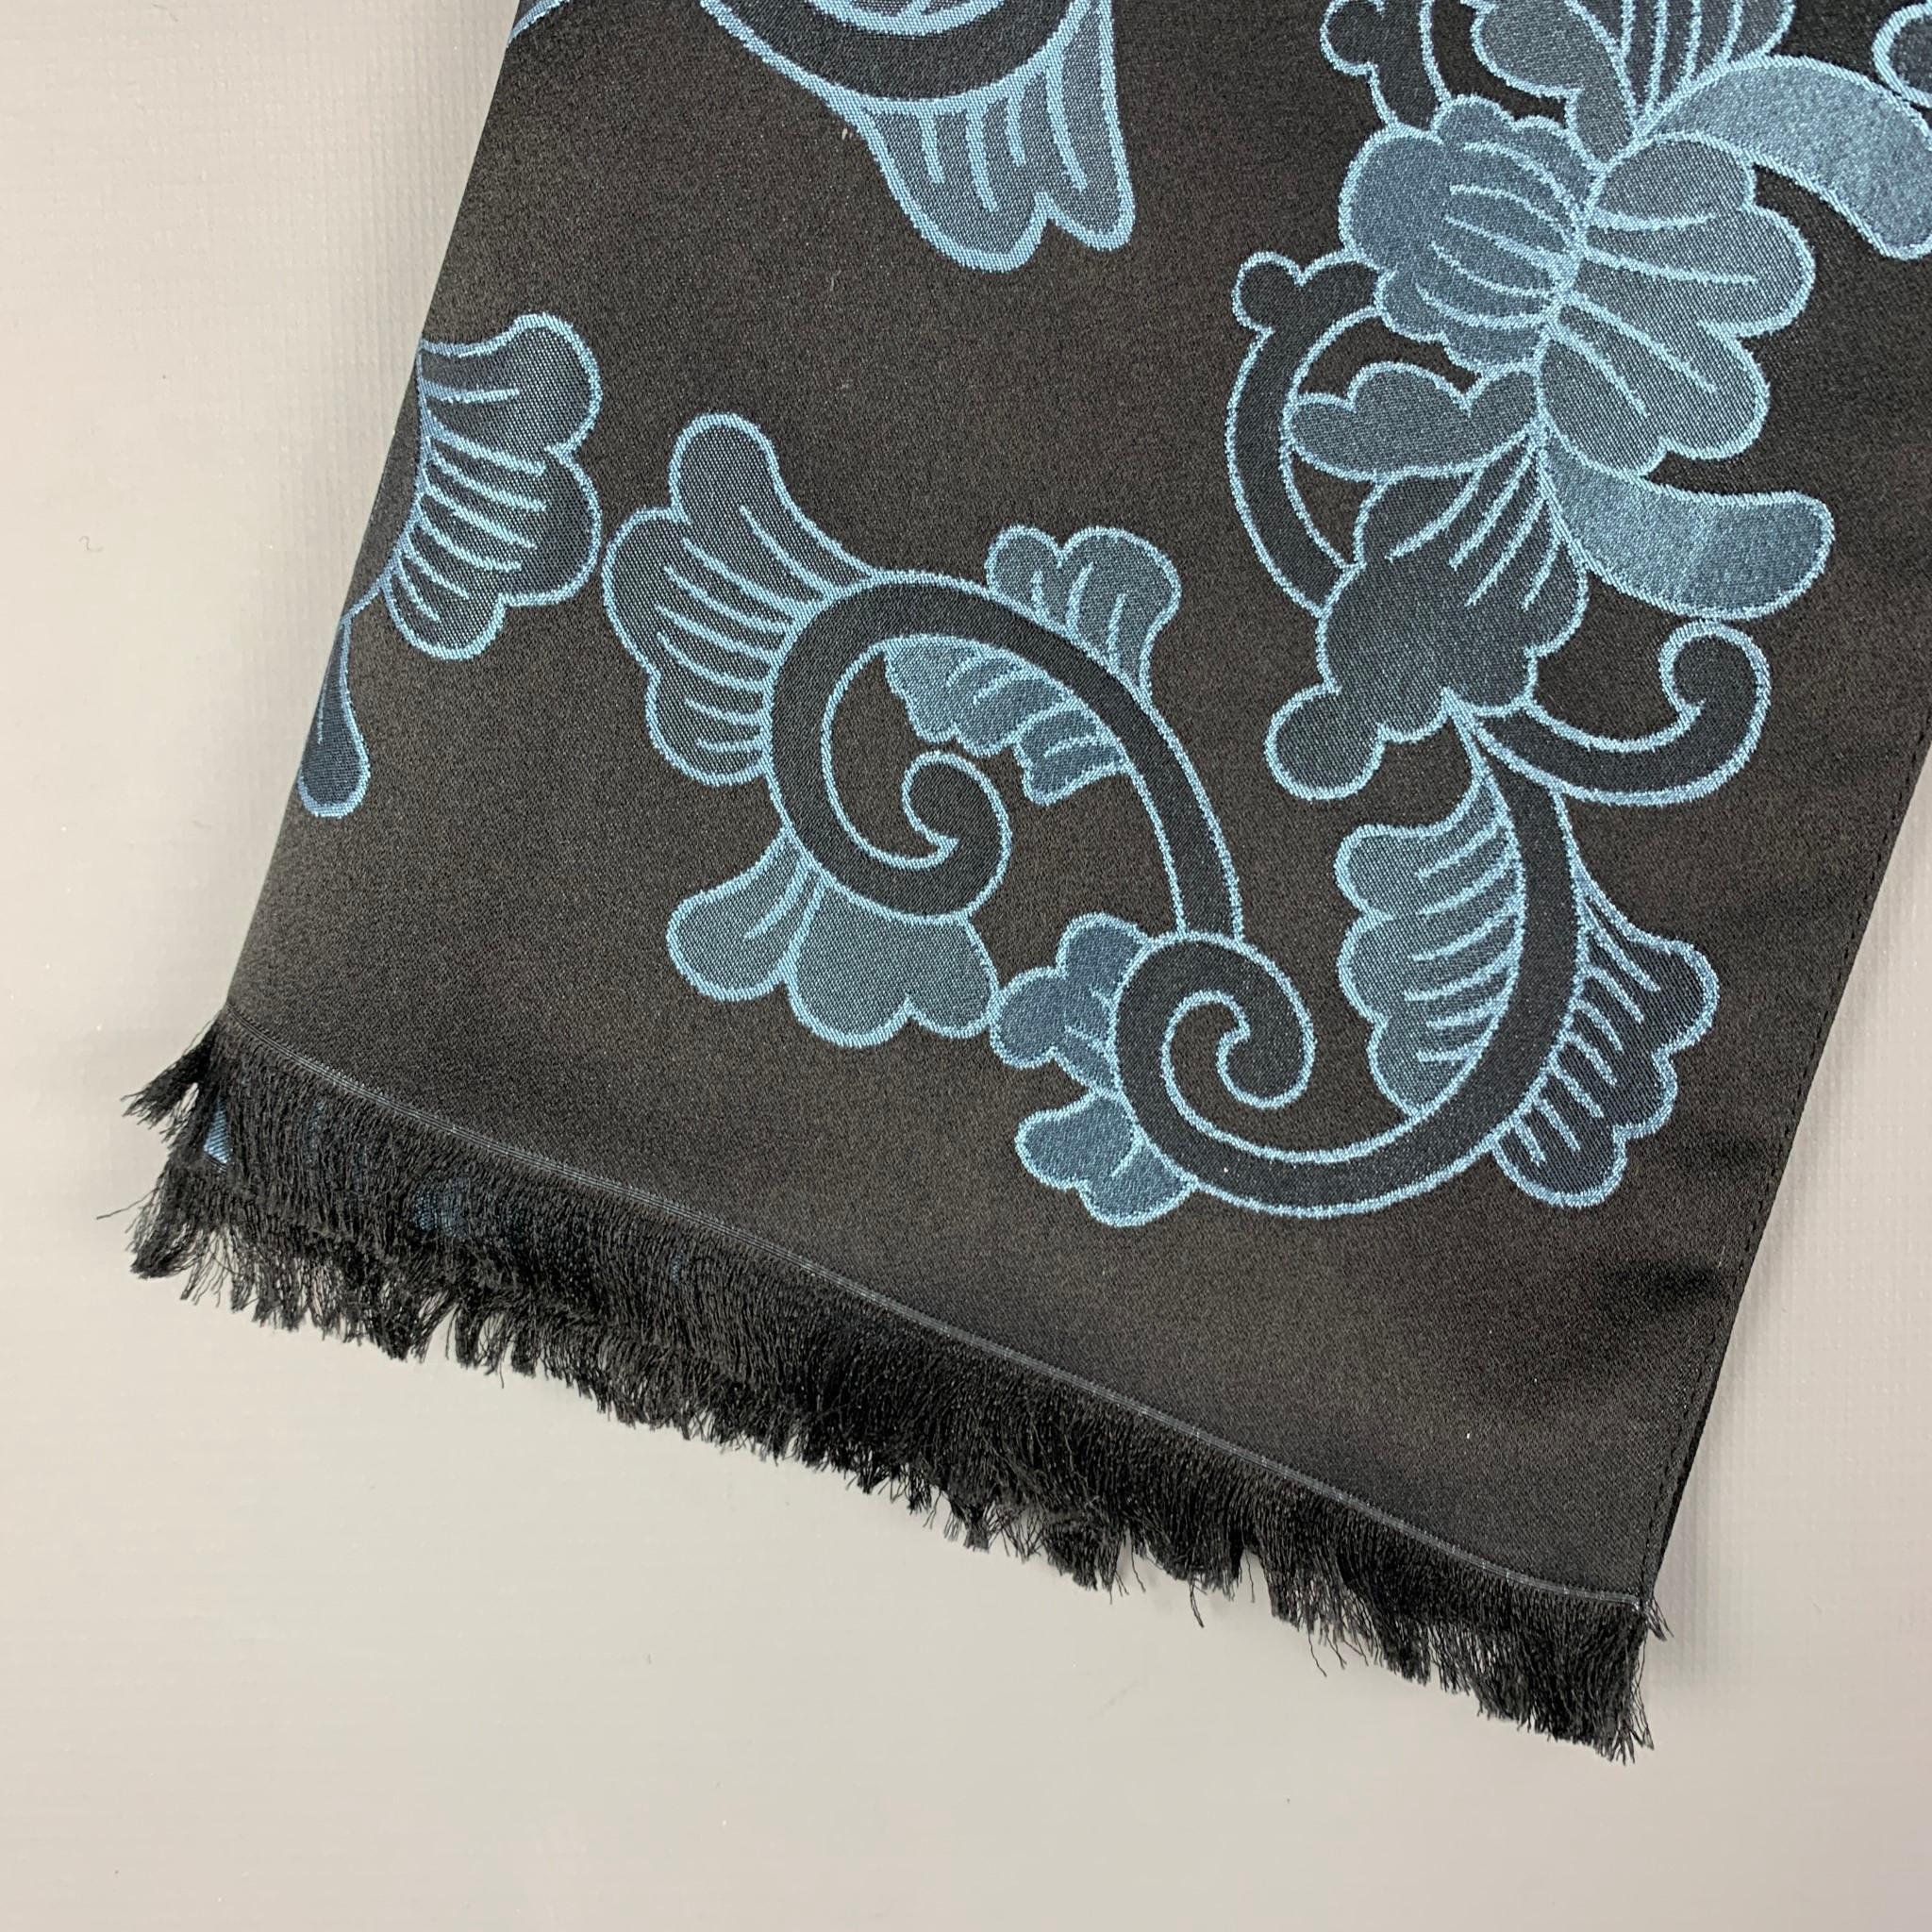 LOUIS VUITTON scarf comes in a blue & black jacquard silk featuring a fringe trim. Includes box. Made in Italy. 

Excellent Pre-Owned Condition.

Measurements:

68 in. x 26 in. 